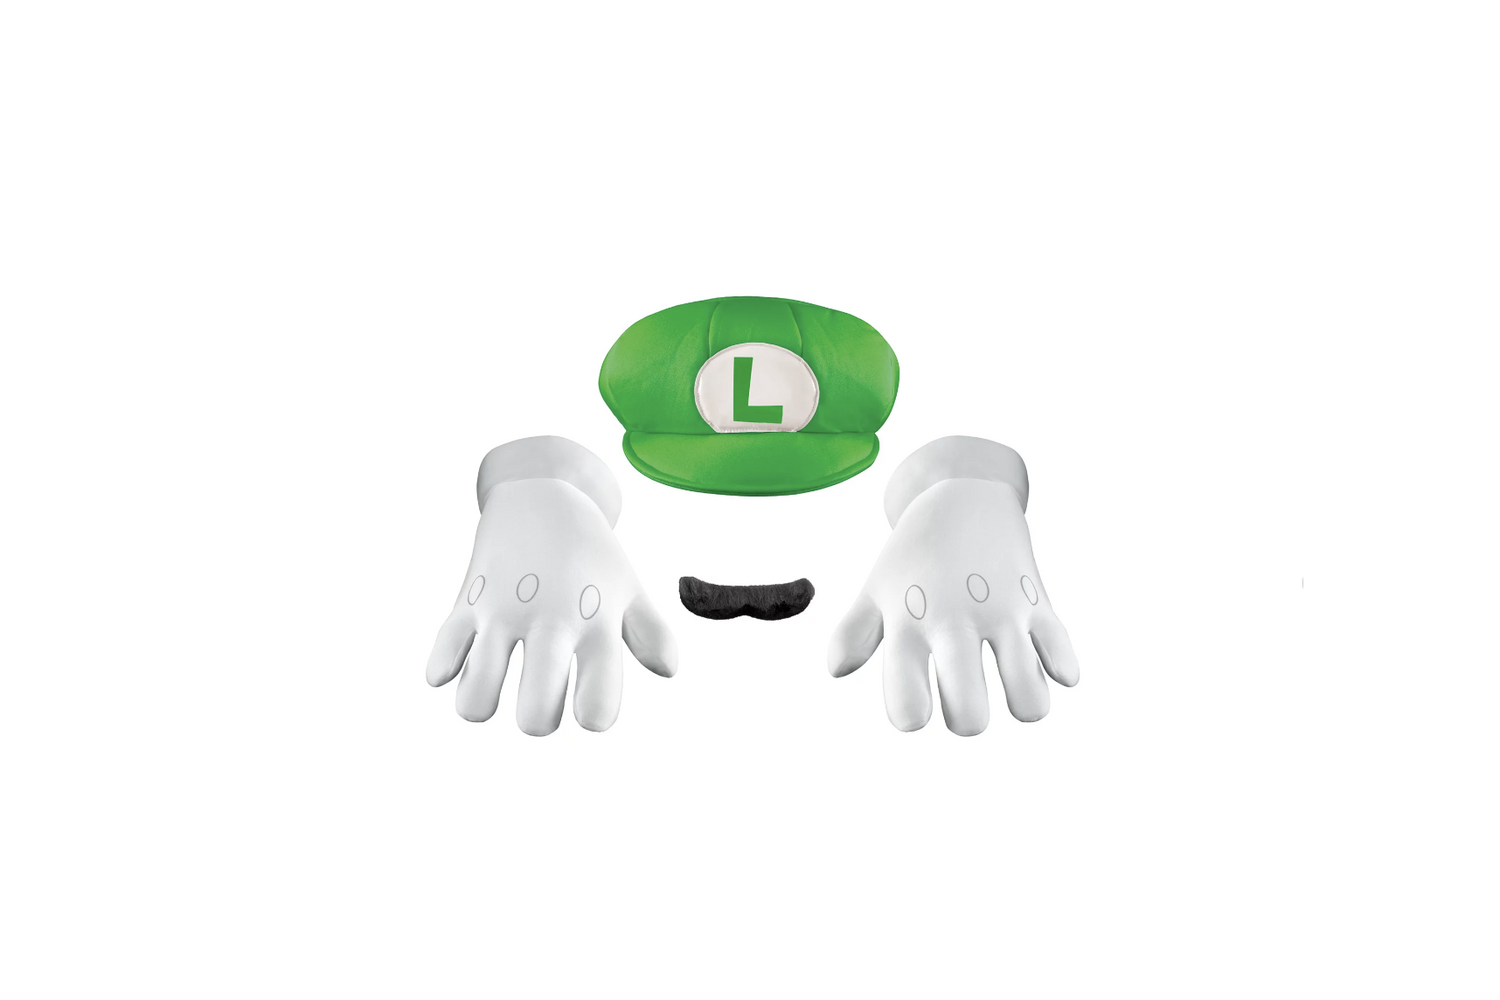 kit  hat  gloves  mustache  luigi  brothers  mario  super  adult  green  accessory  shipping  halloween  costume  cosplay  gaming  gift  free shipping  trend  trending